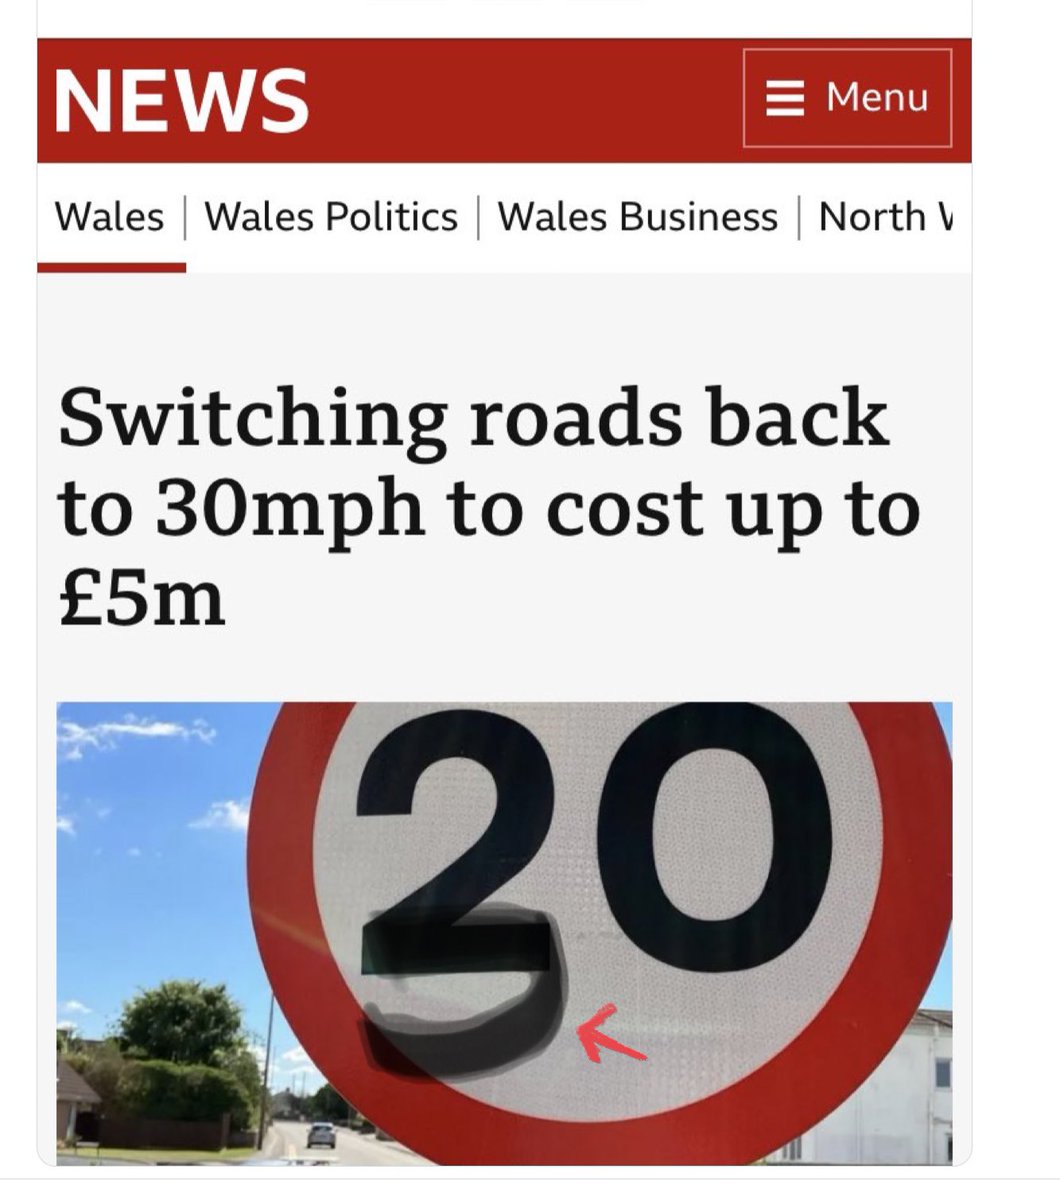 WALES 🏴󠁧󠁢󠁷󠁬󠁳󠁿 Switching roads back to 30 cost £5 million? Just add a ‘wiggle’ to the Number 2 on the signs! 😂